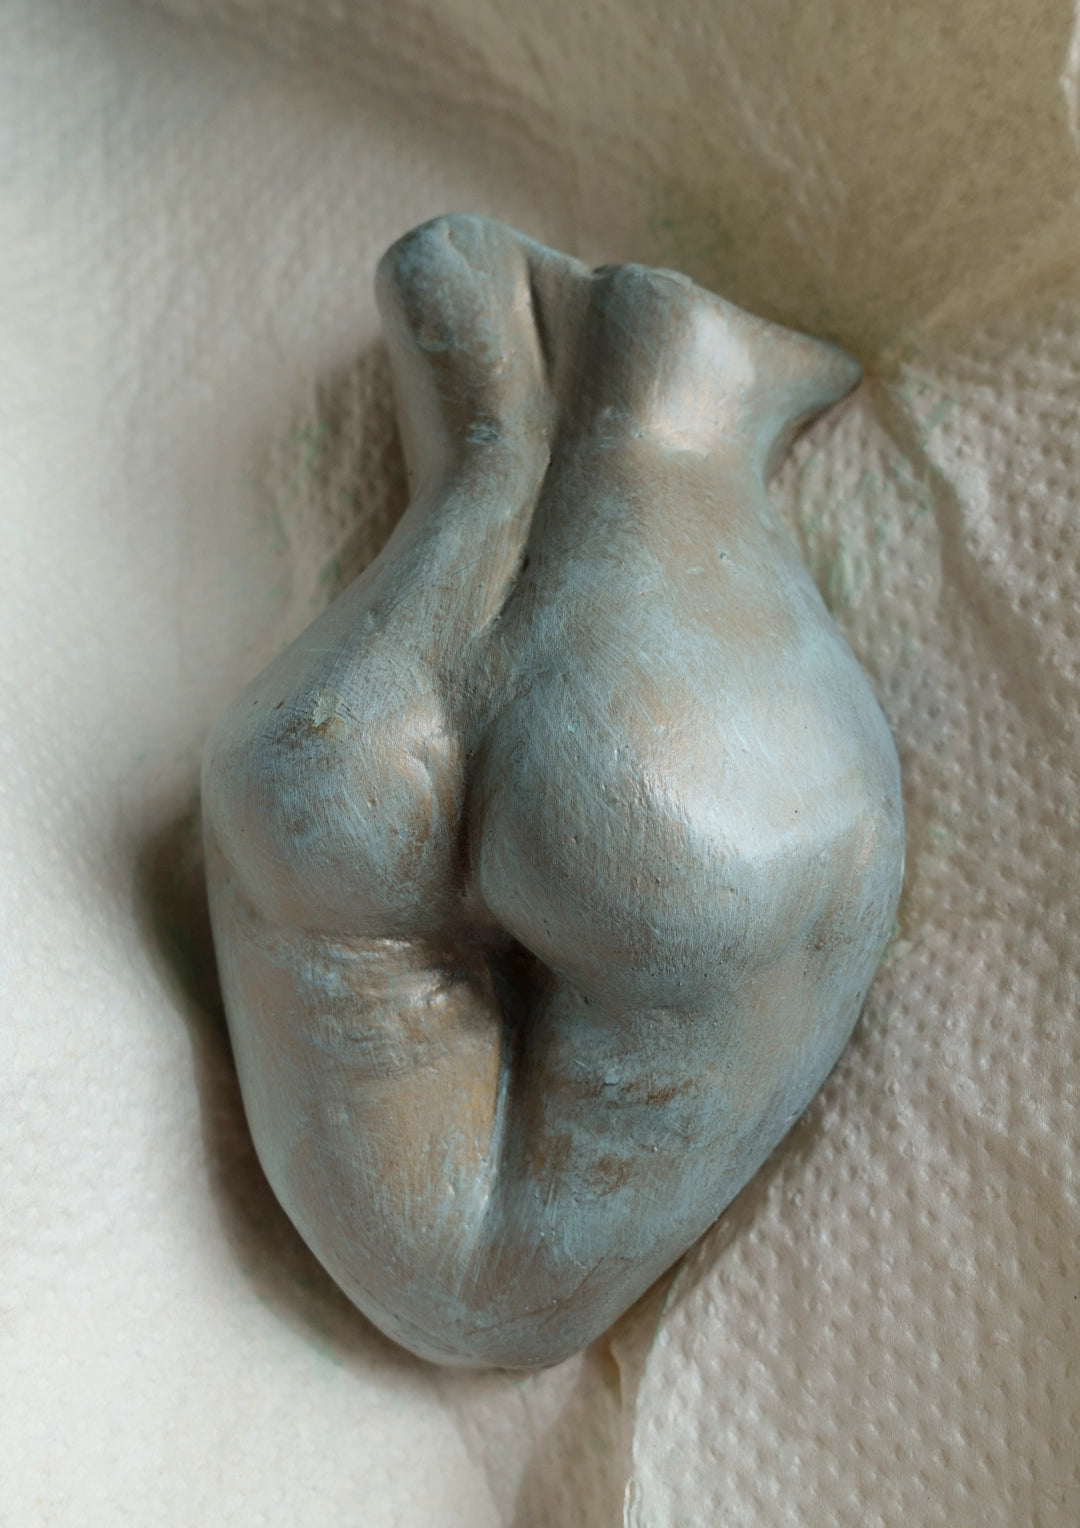 "Butt Sculptures - Painting Plaster Figurines" Workshop with Tobias in Cologne, Germany